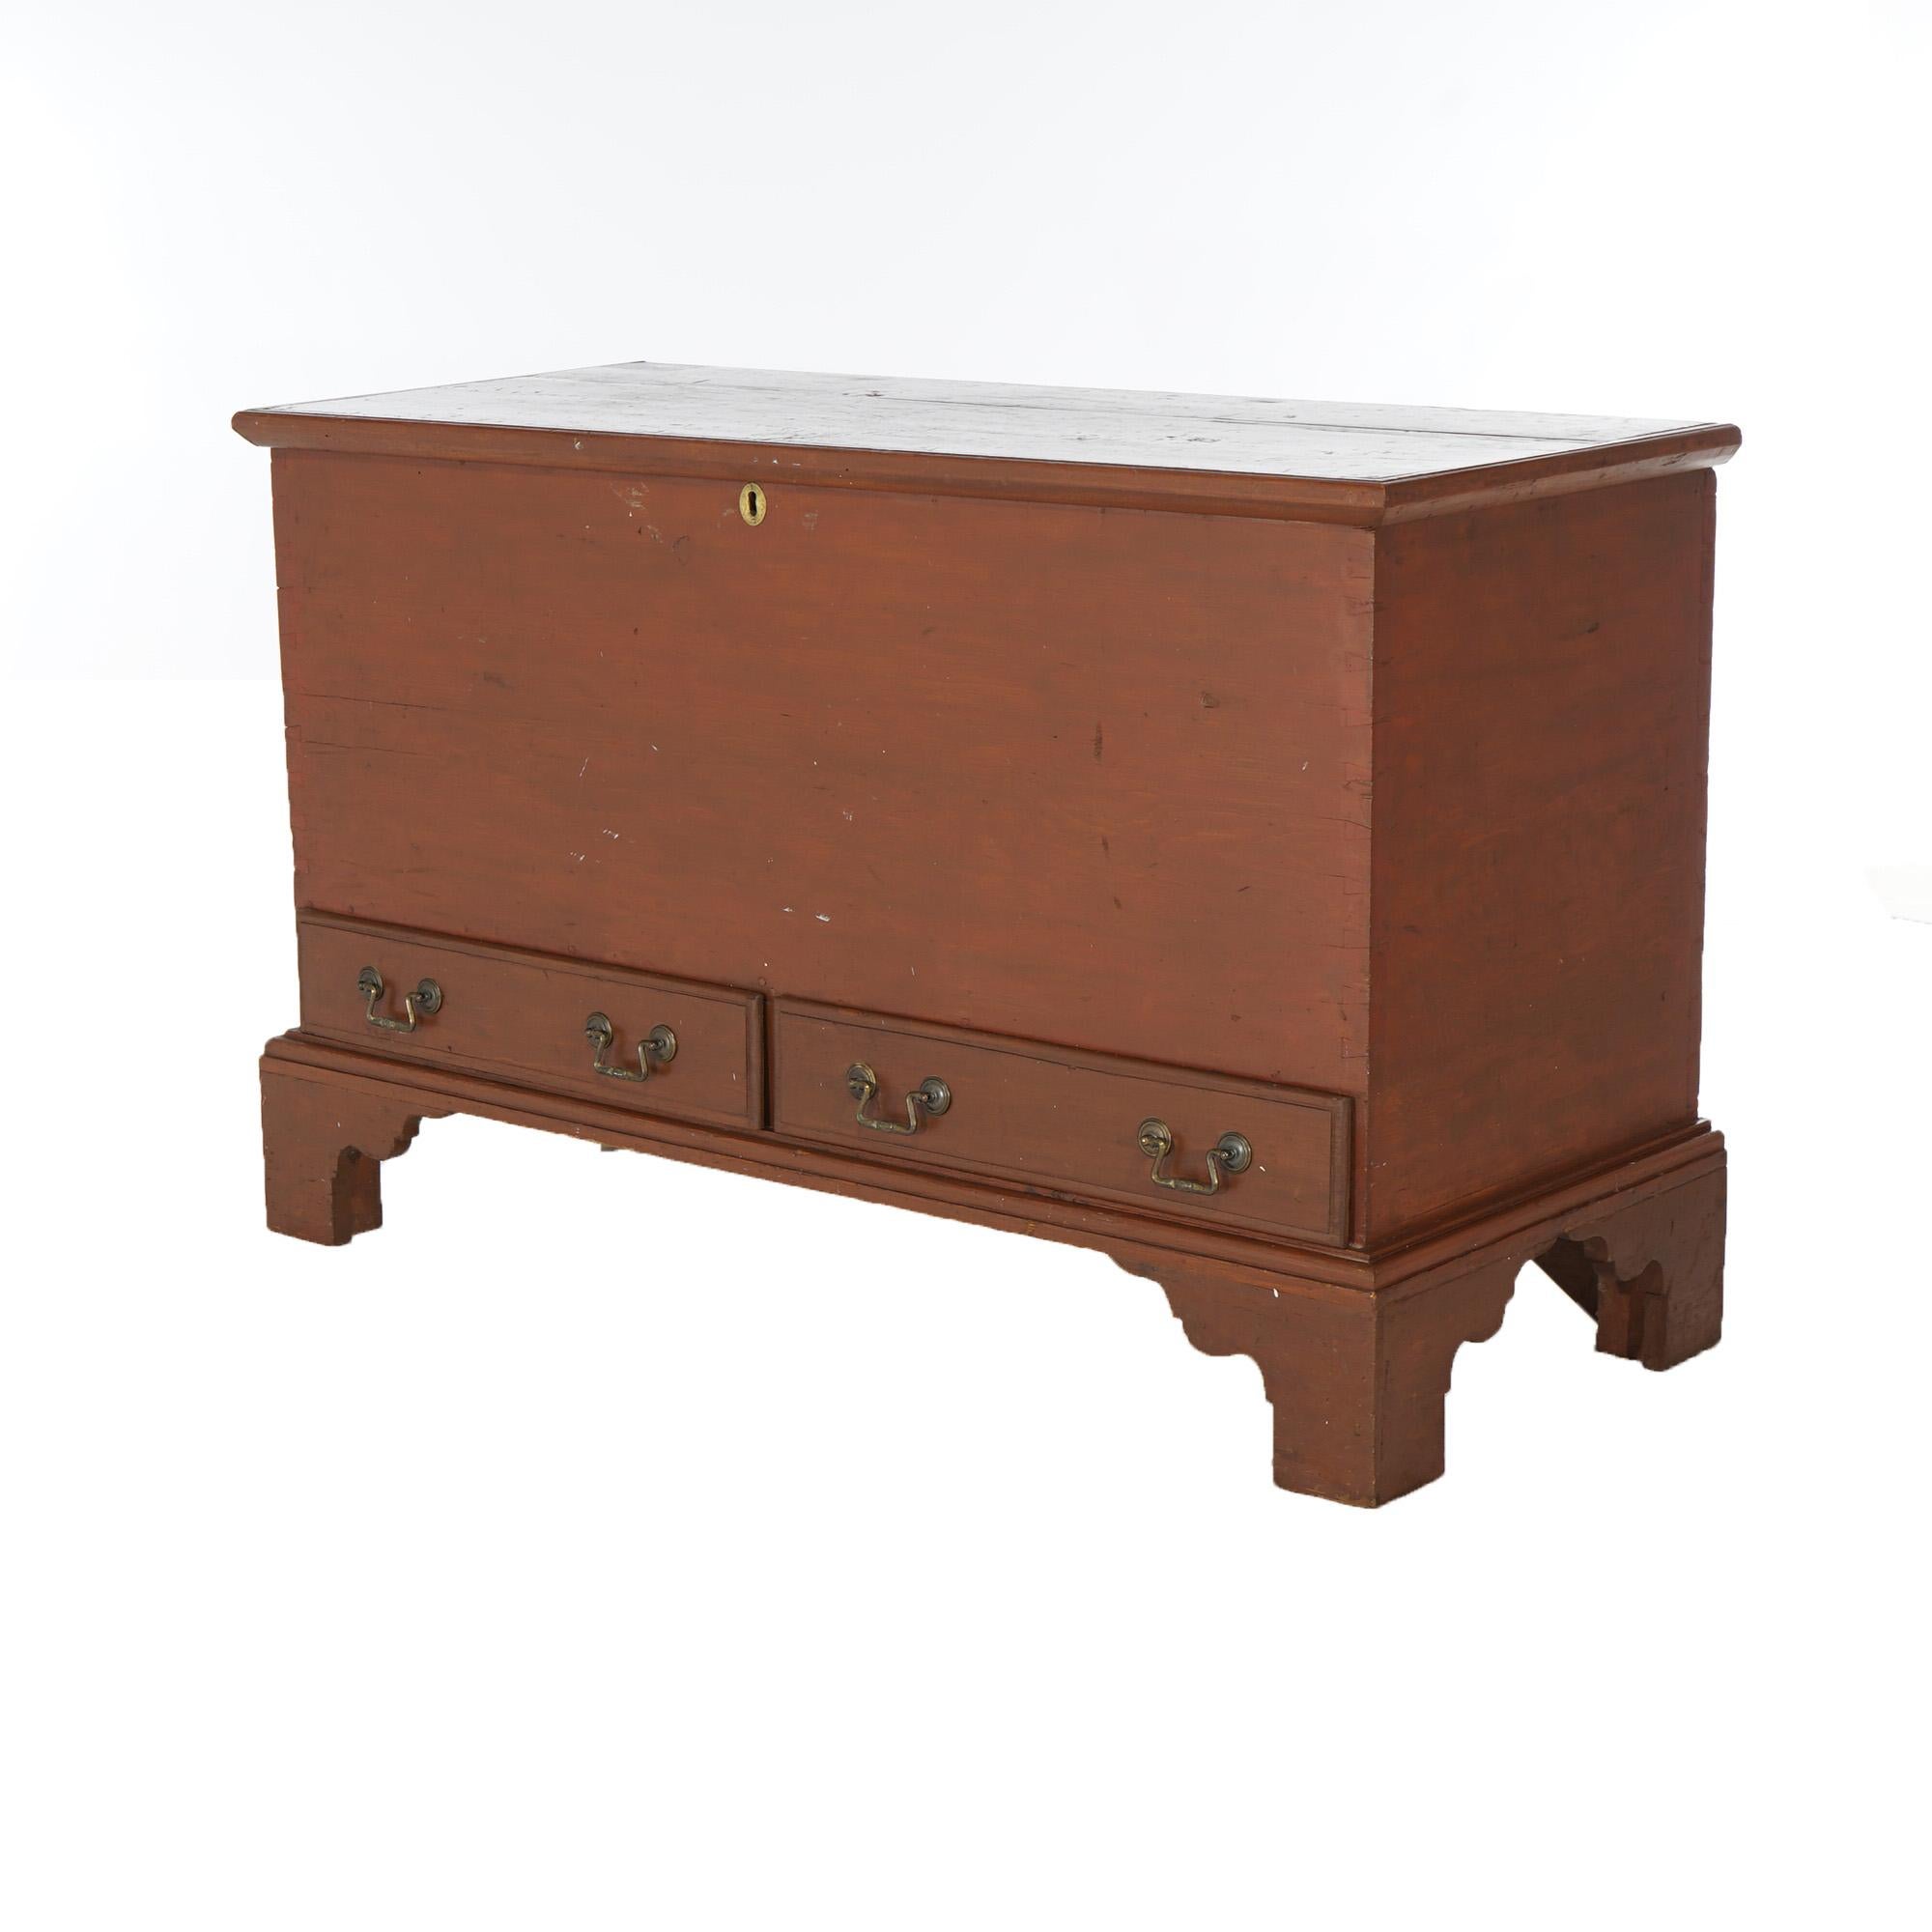 An antique Chippendale blanket chest offers soft wood construction with lift top having iron strap hinges and over two drawers, raised on bracket feet, c1830

Measures - 30